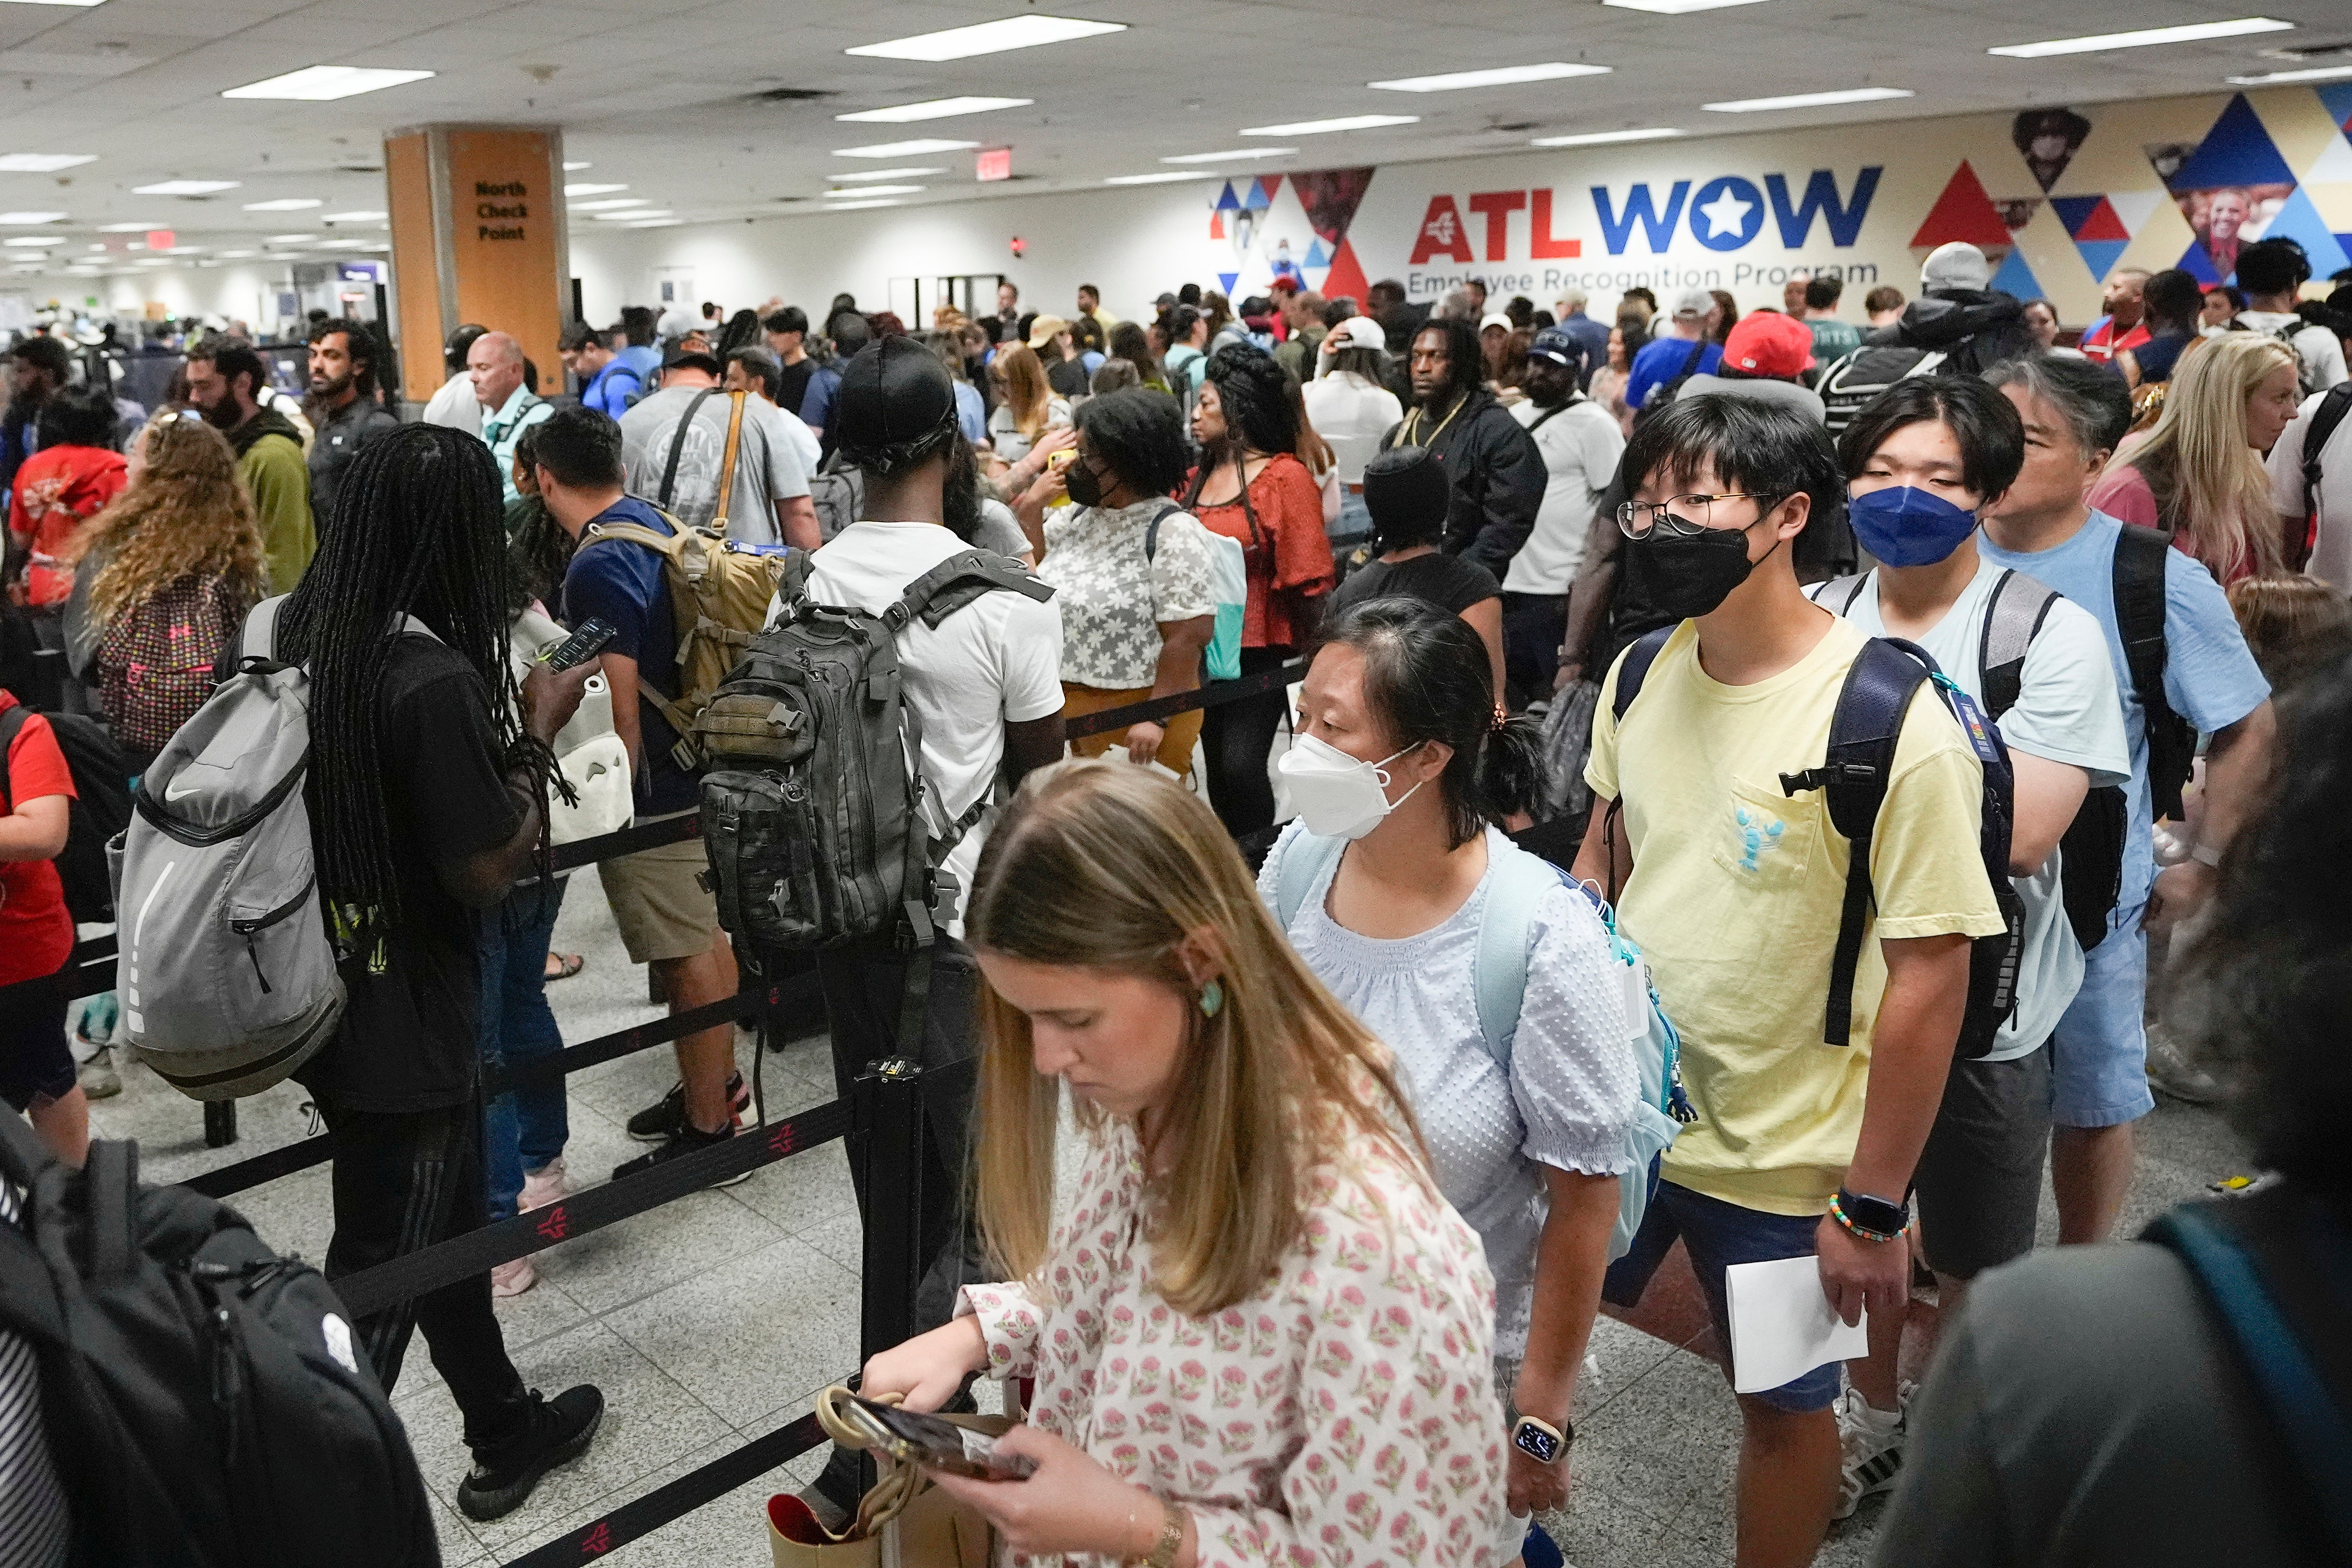 More than 32 million people are expected to pass through the nation’s airports during the July 4 holiday season